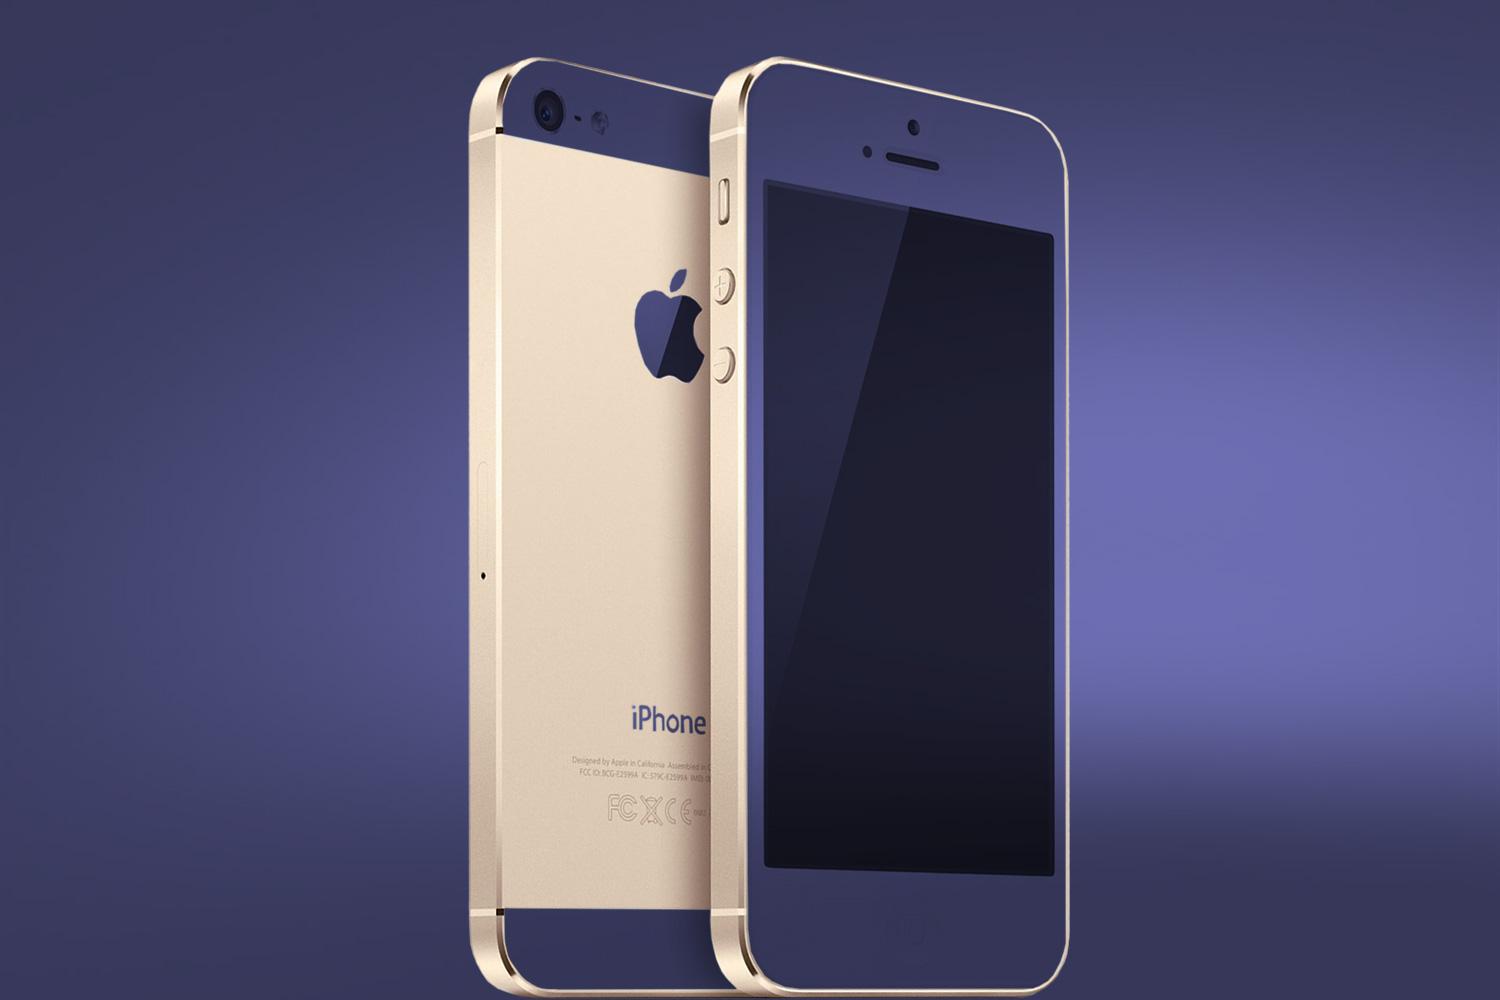 iphone 5c colors gold